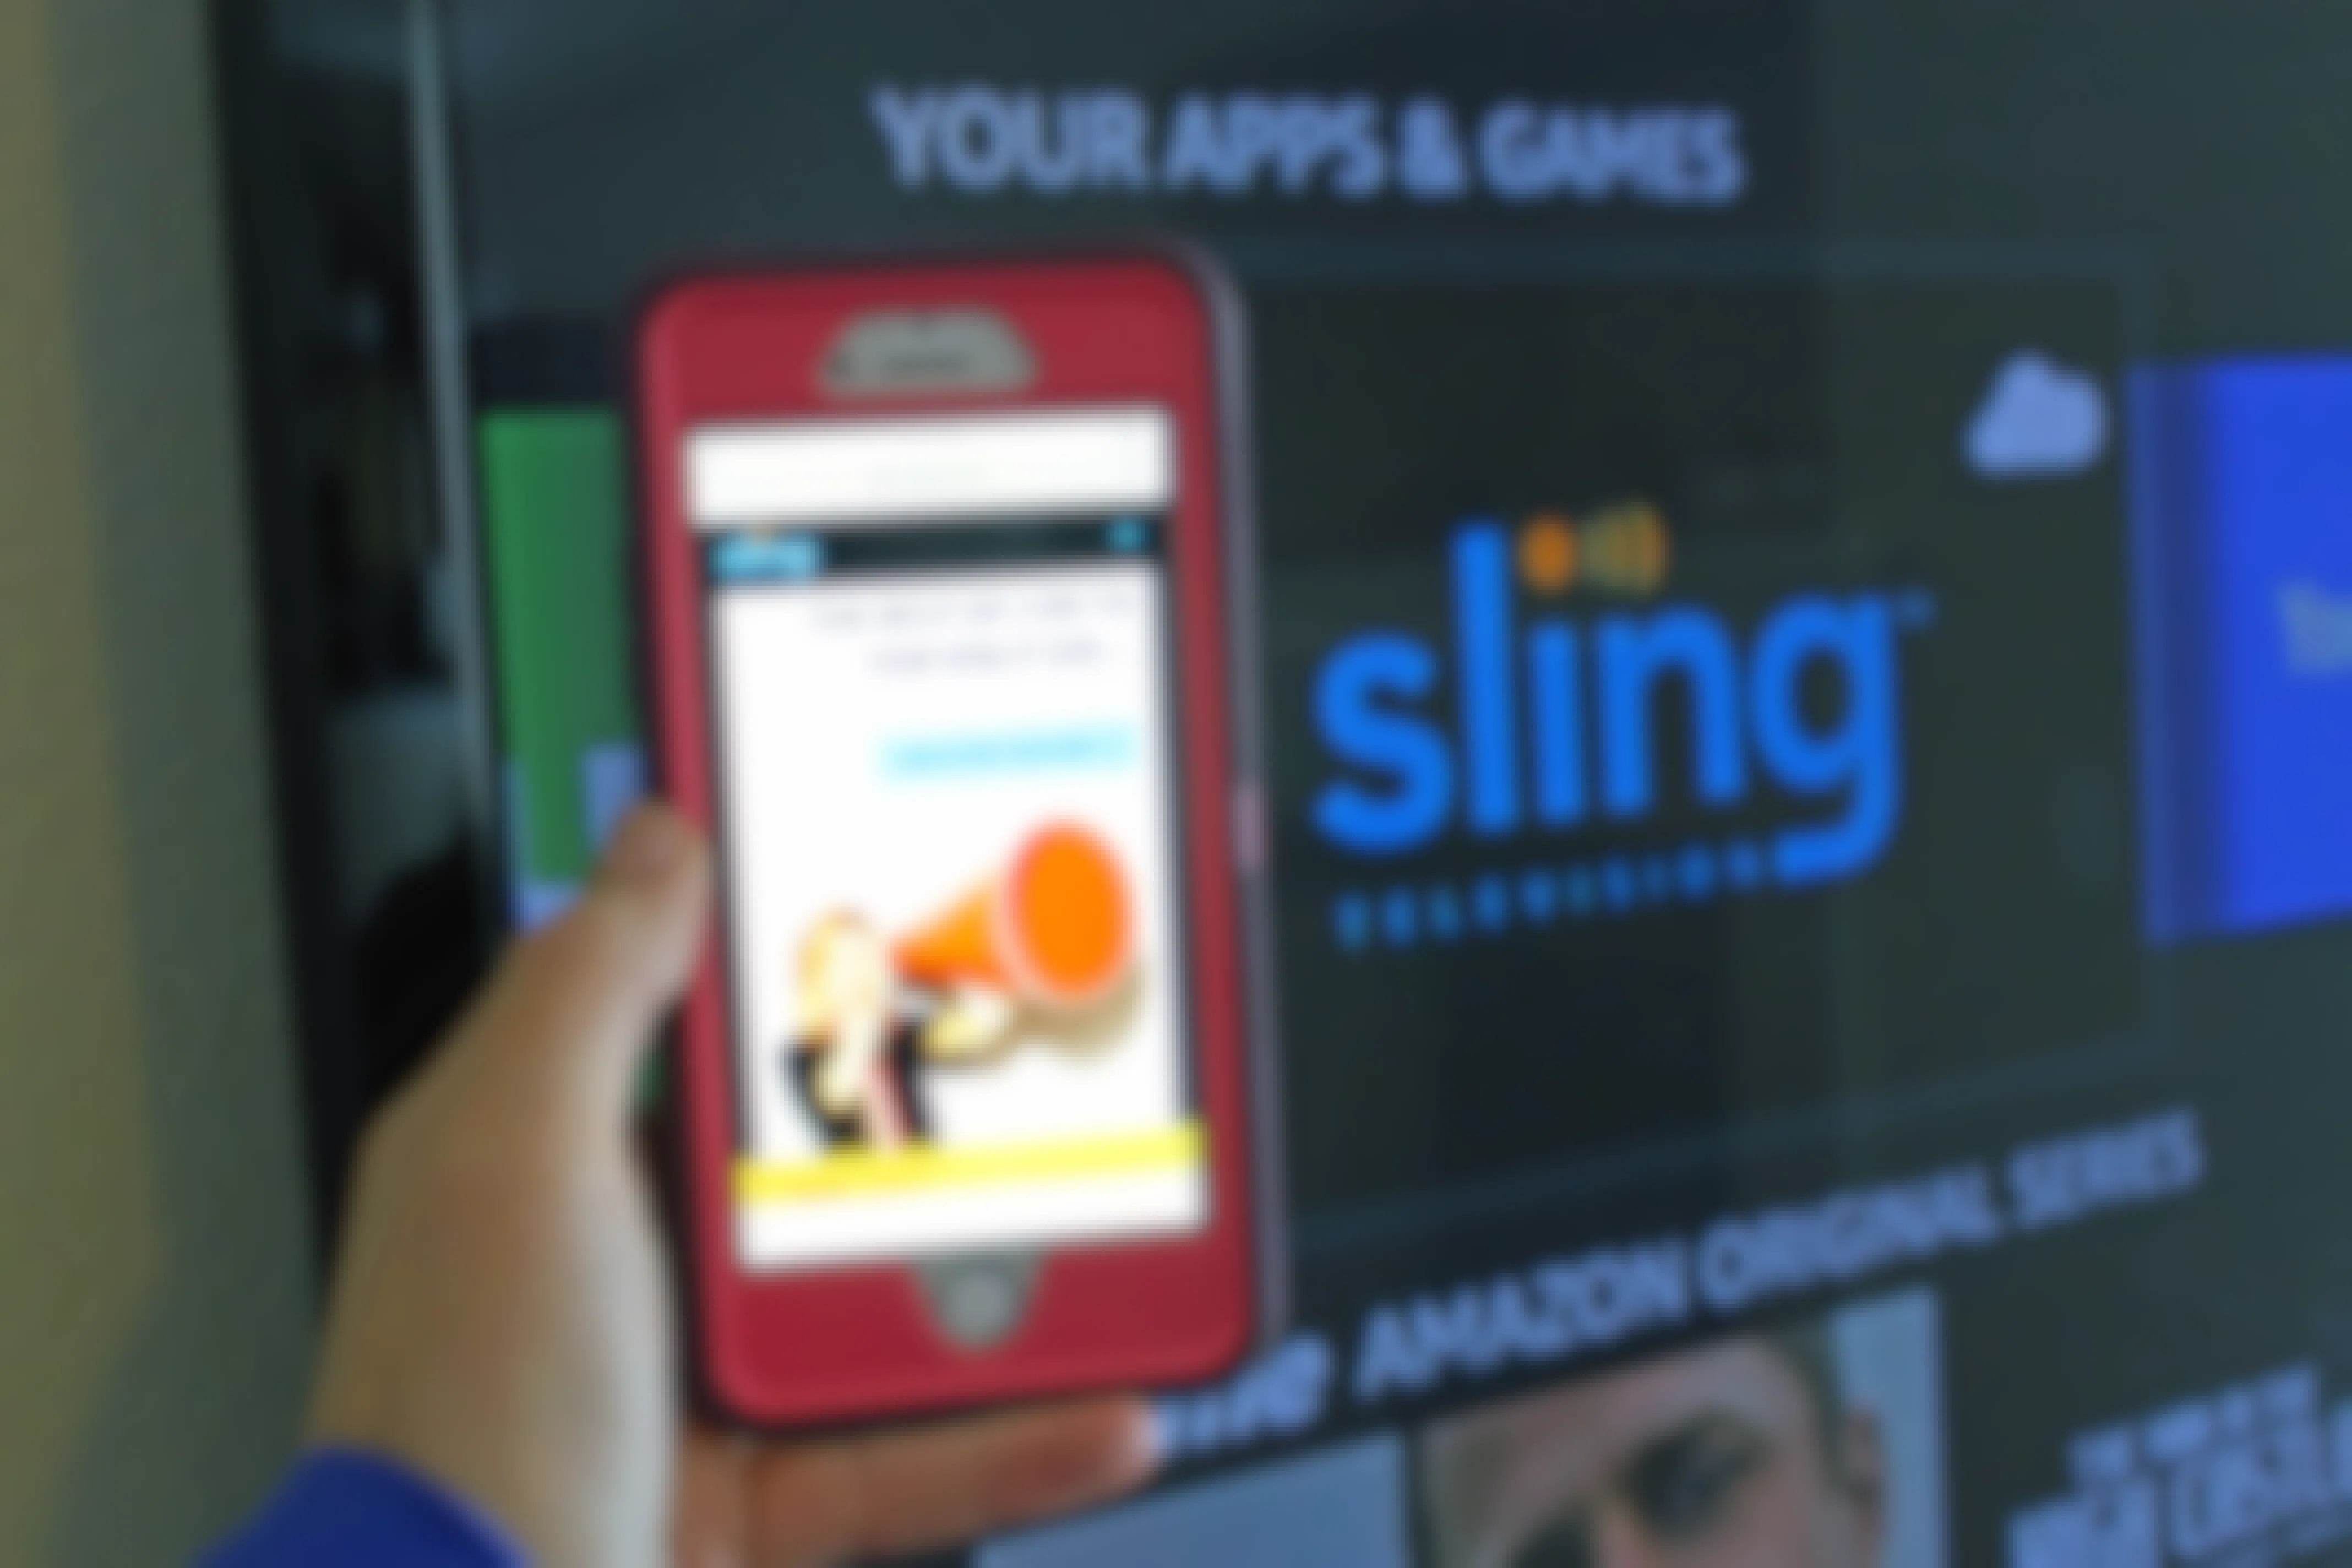 Sling TV channels deal shown on a phone screen near television